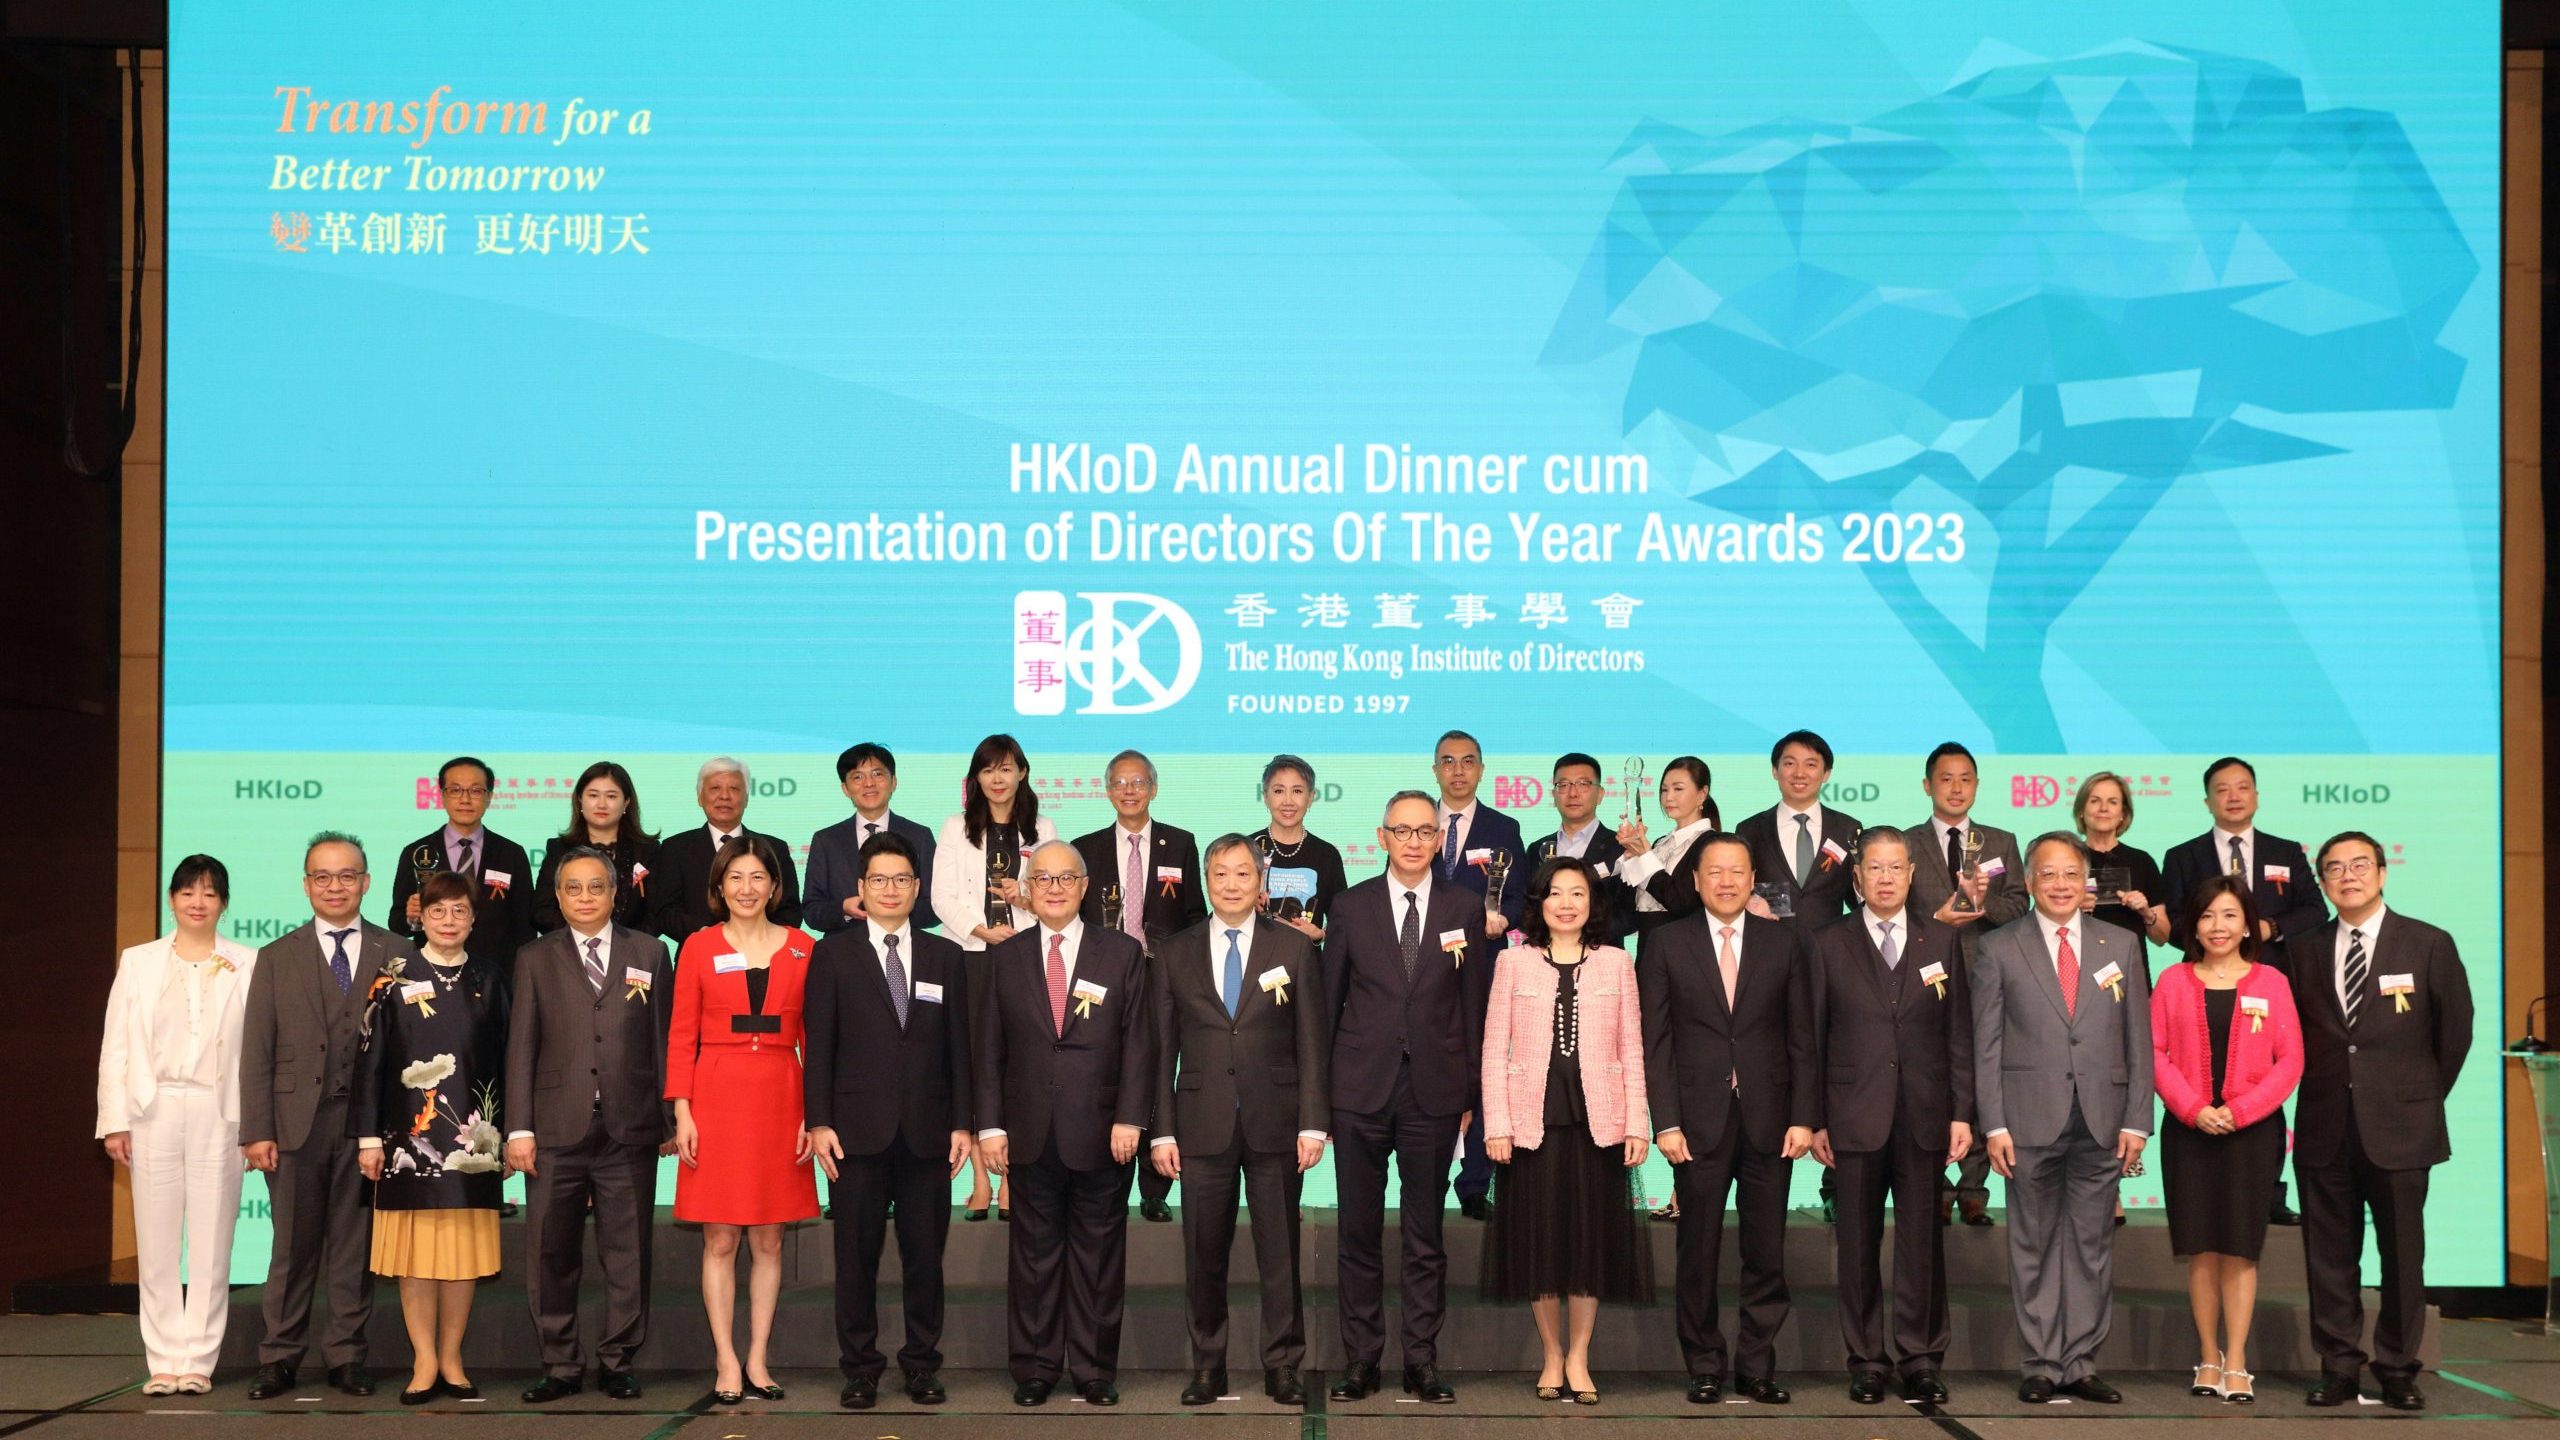 HKIoD Annual Dinner cum Presentation of Directors Of The Year Awards 2023 Photo Gallery